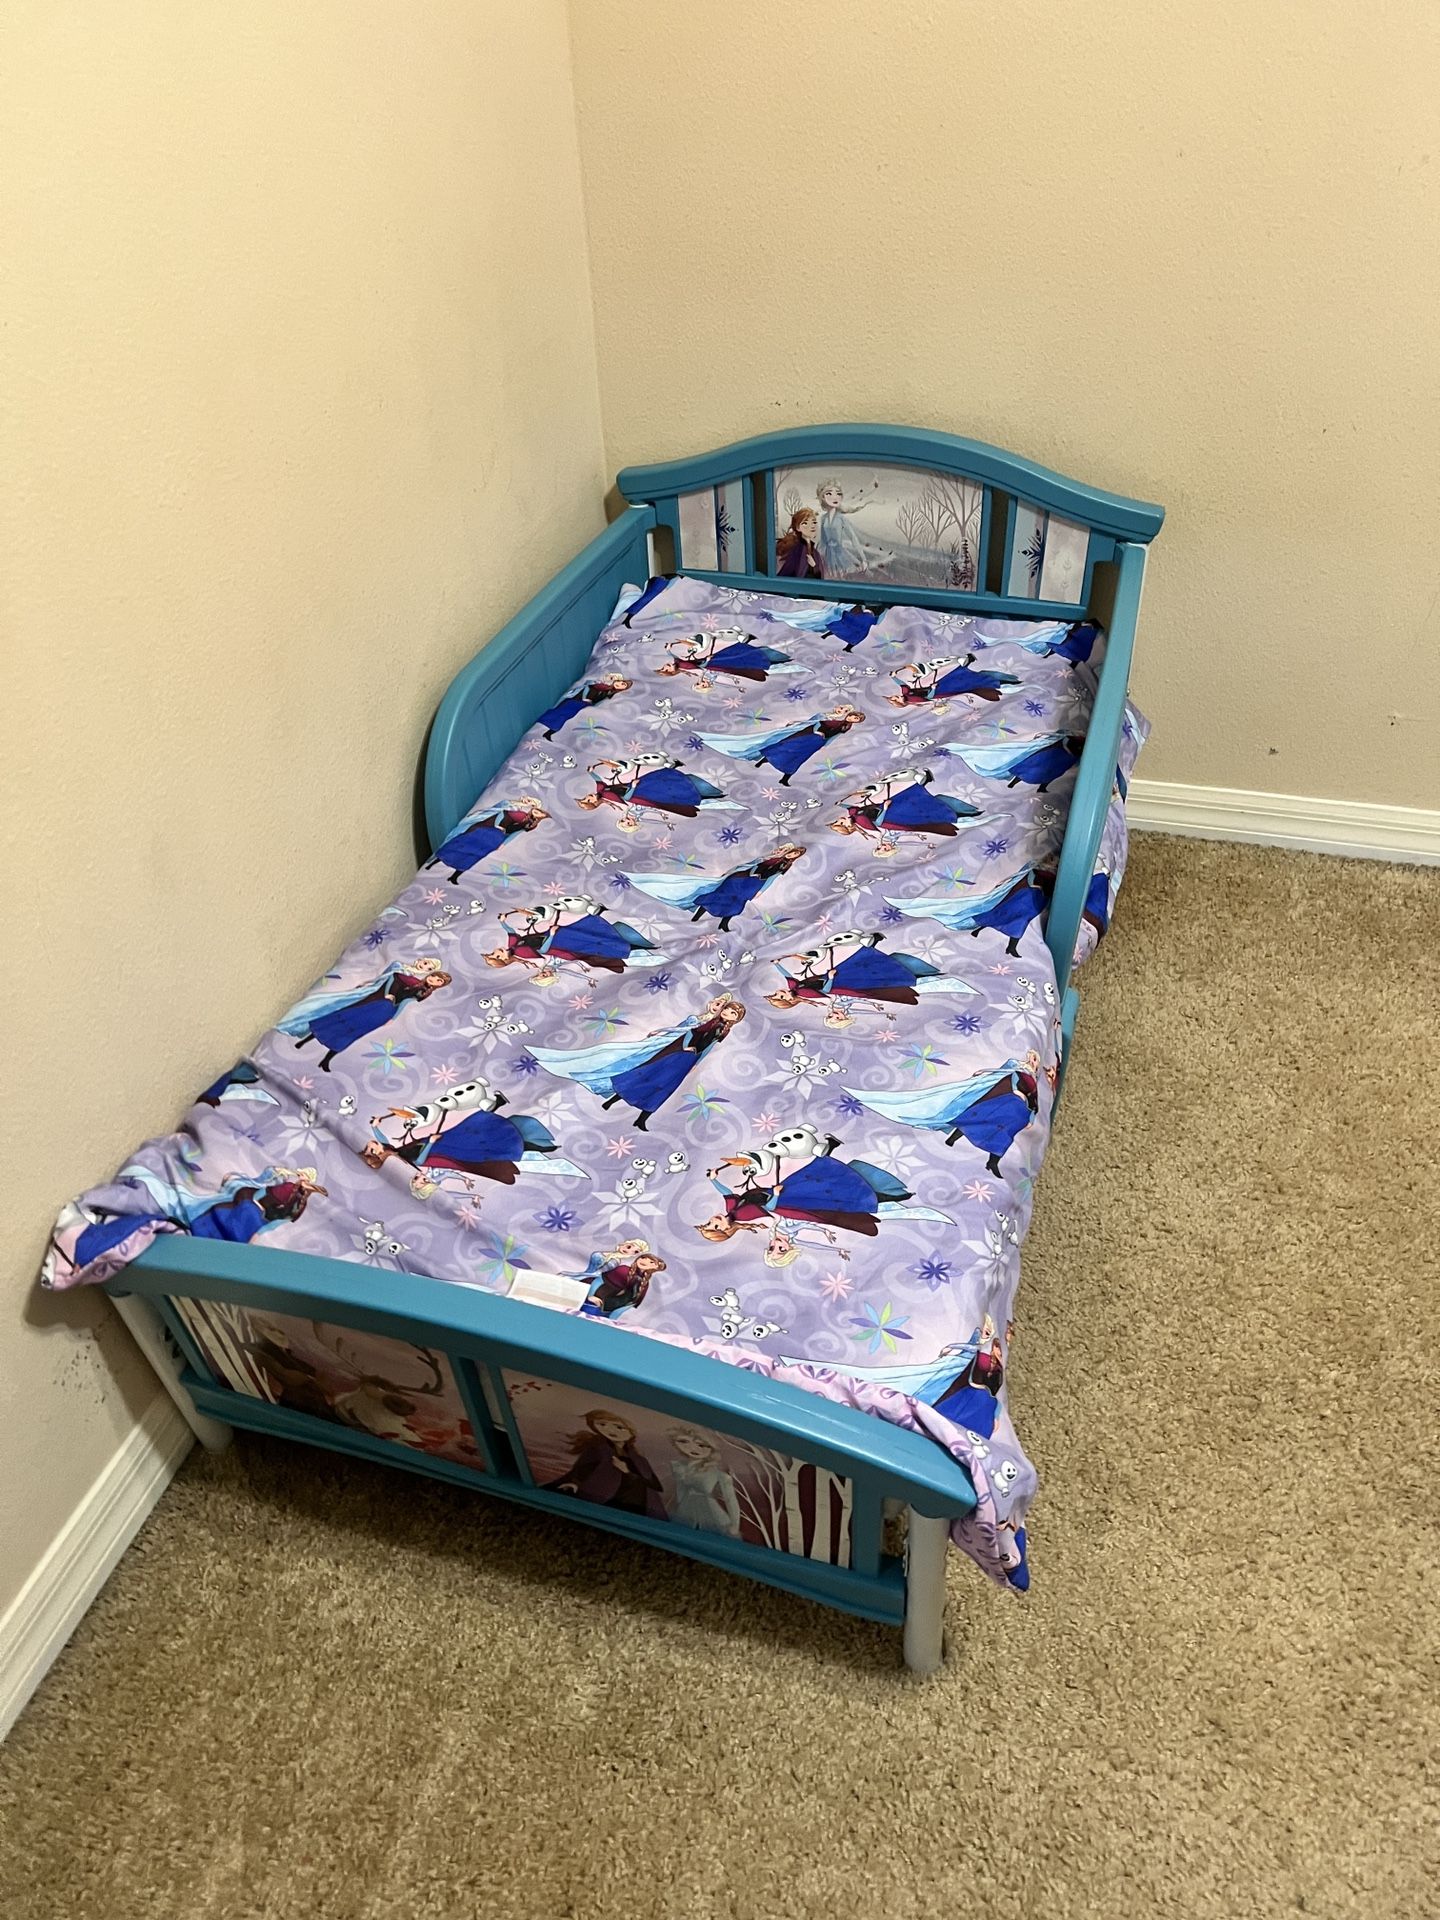 Childs Bed Frozen Theme Mattress Included 